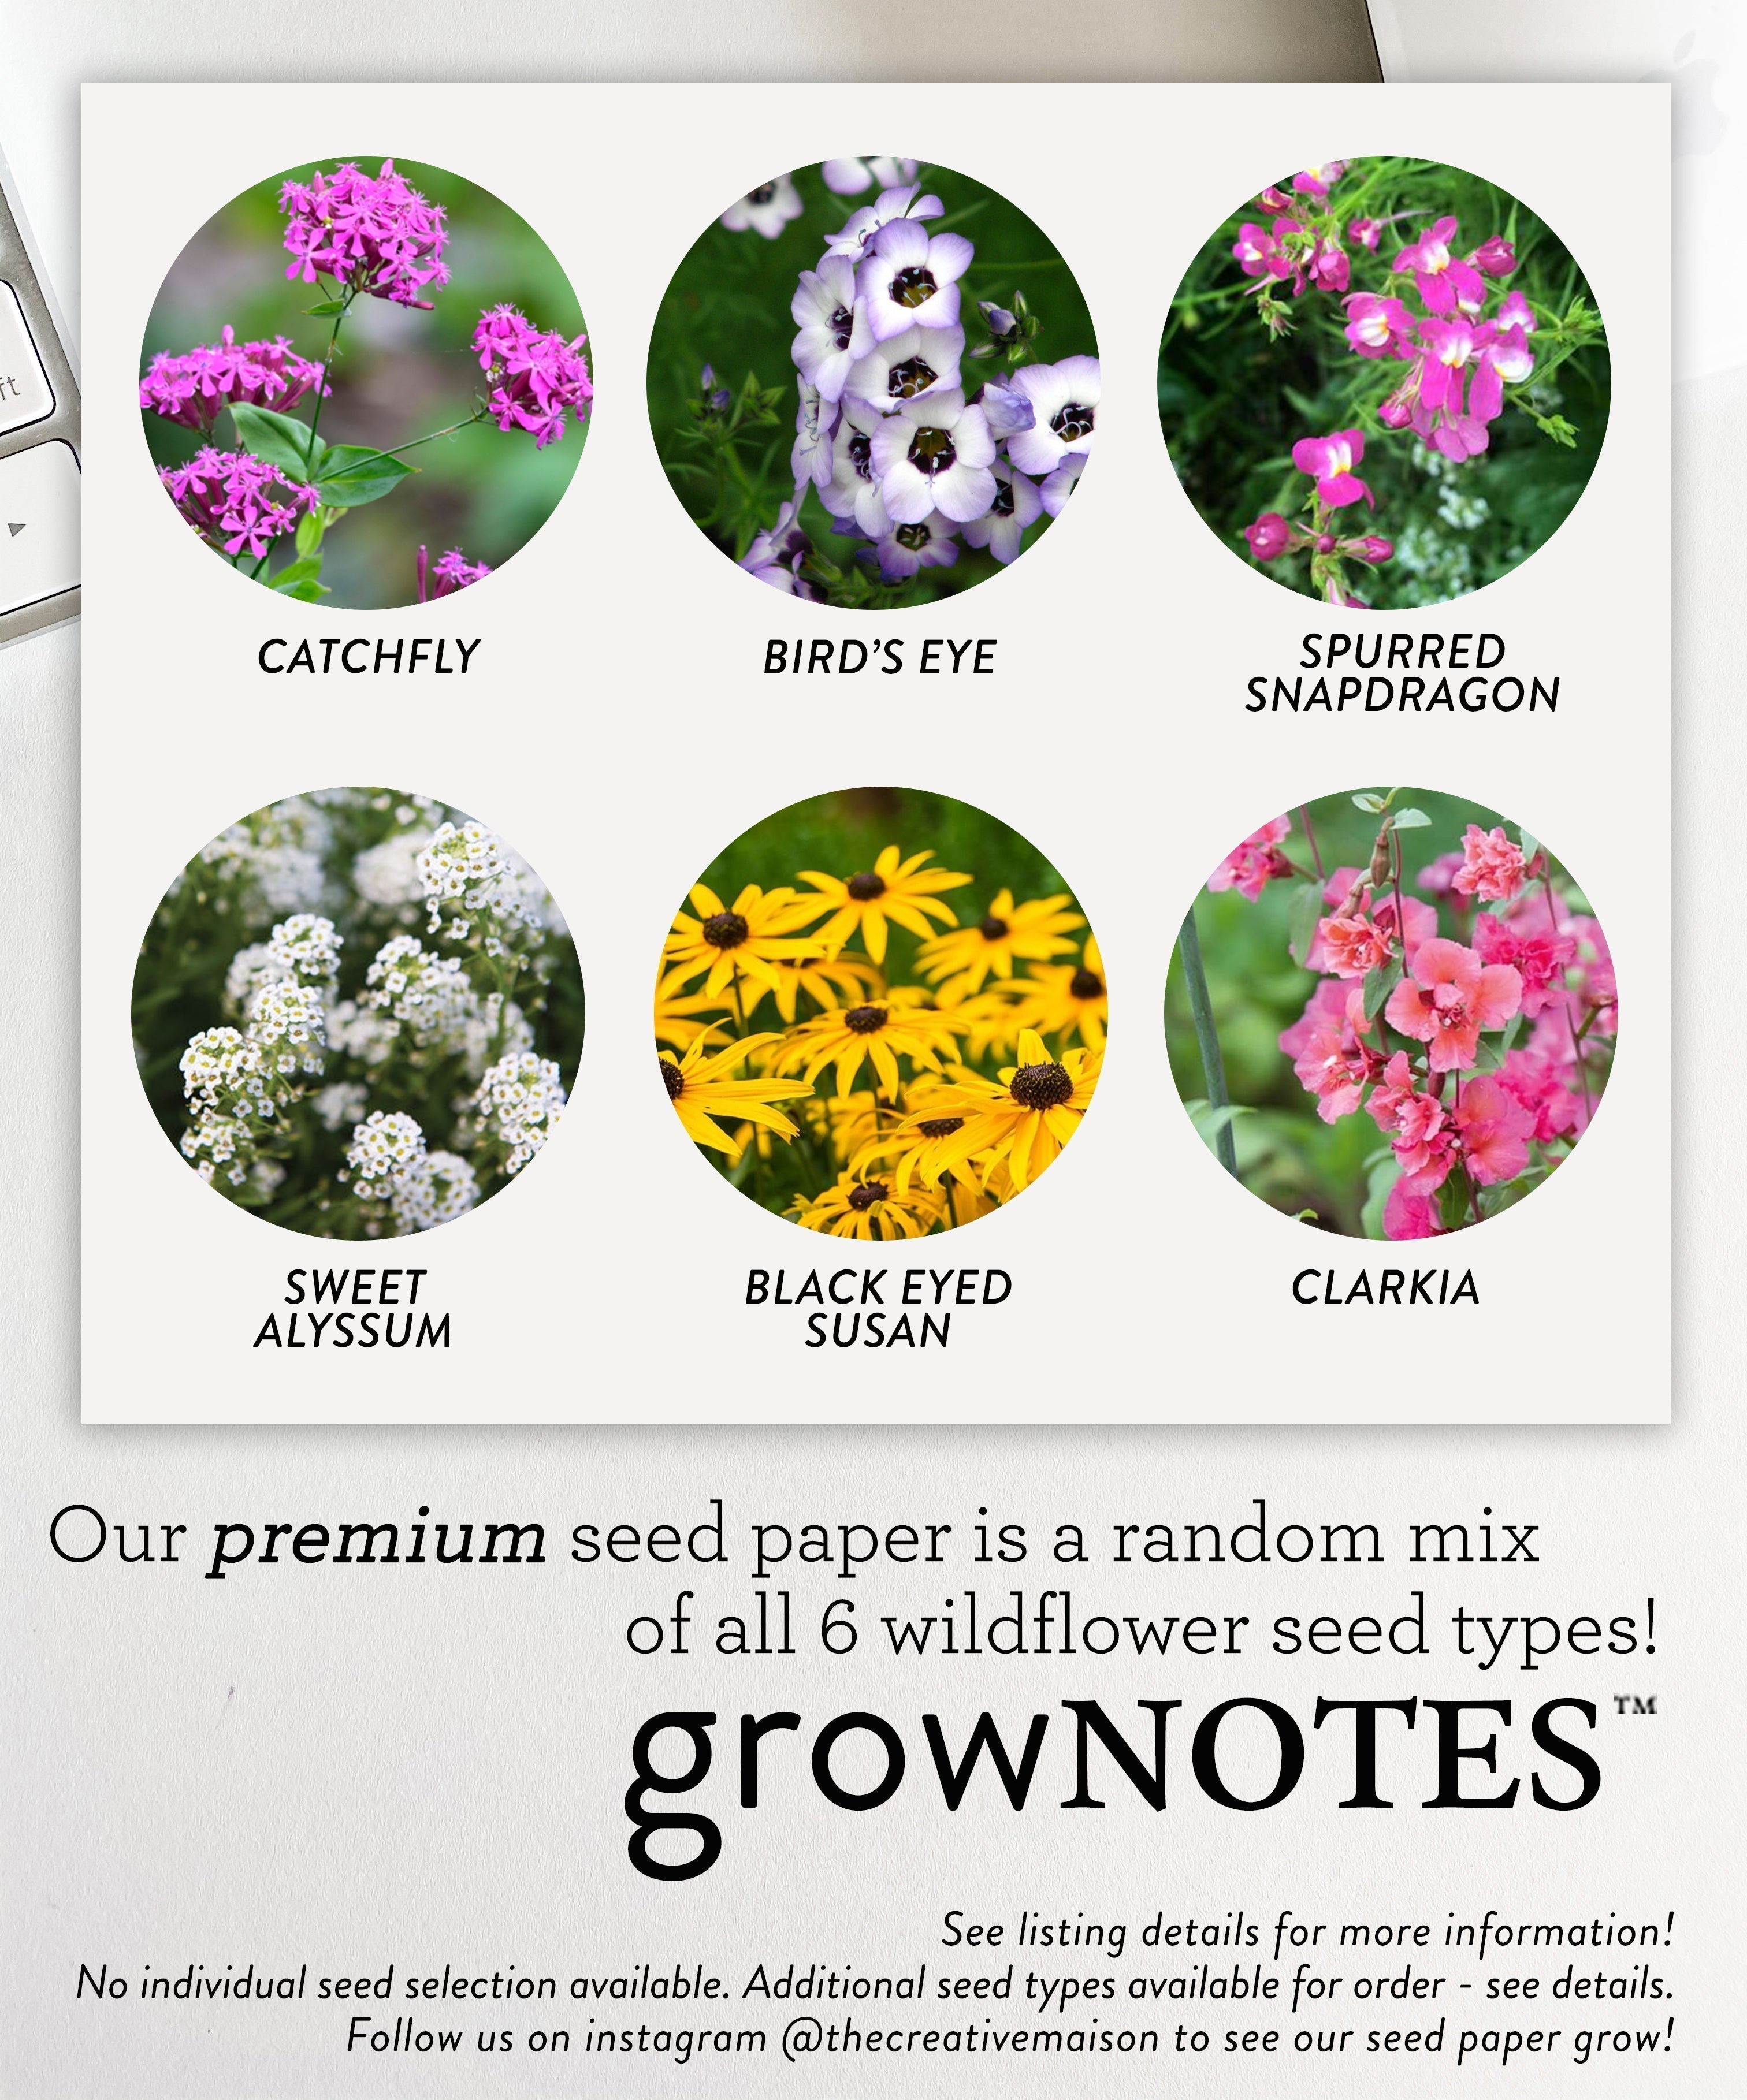 growNOTES™ Holiday Greeting Cards on Plantable Seed Paper - Seeds & Greetings Sleigh